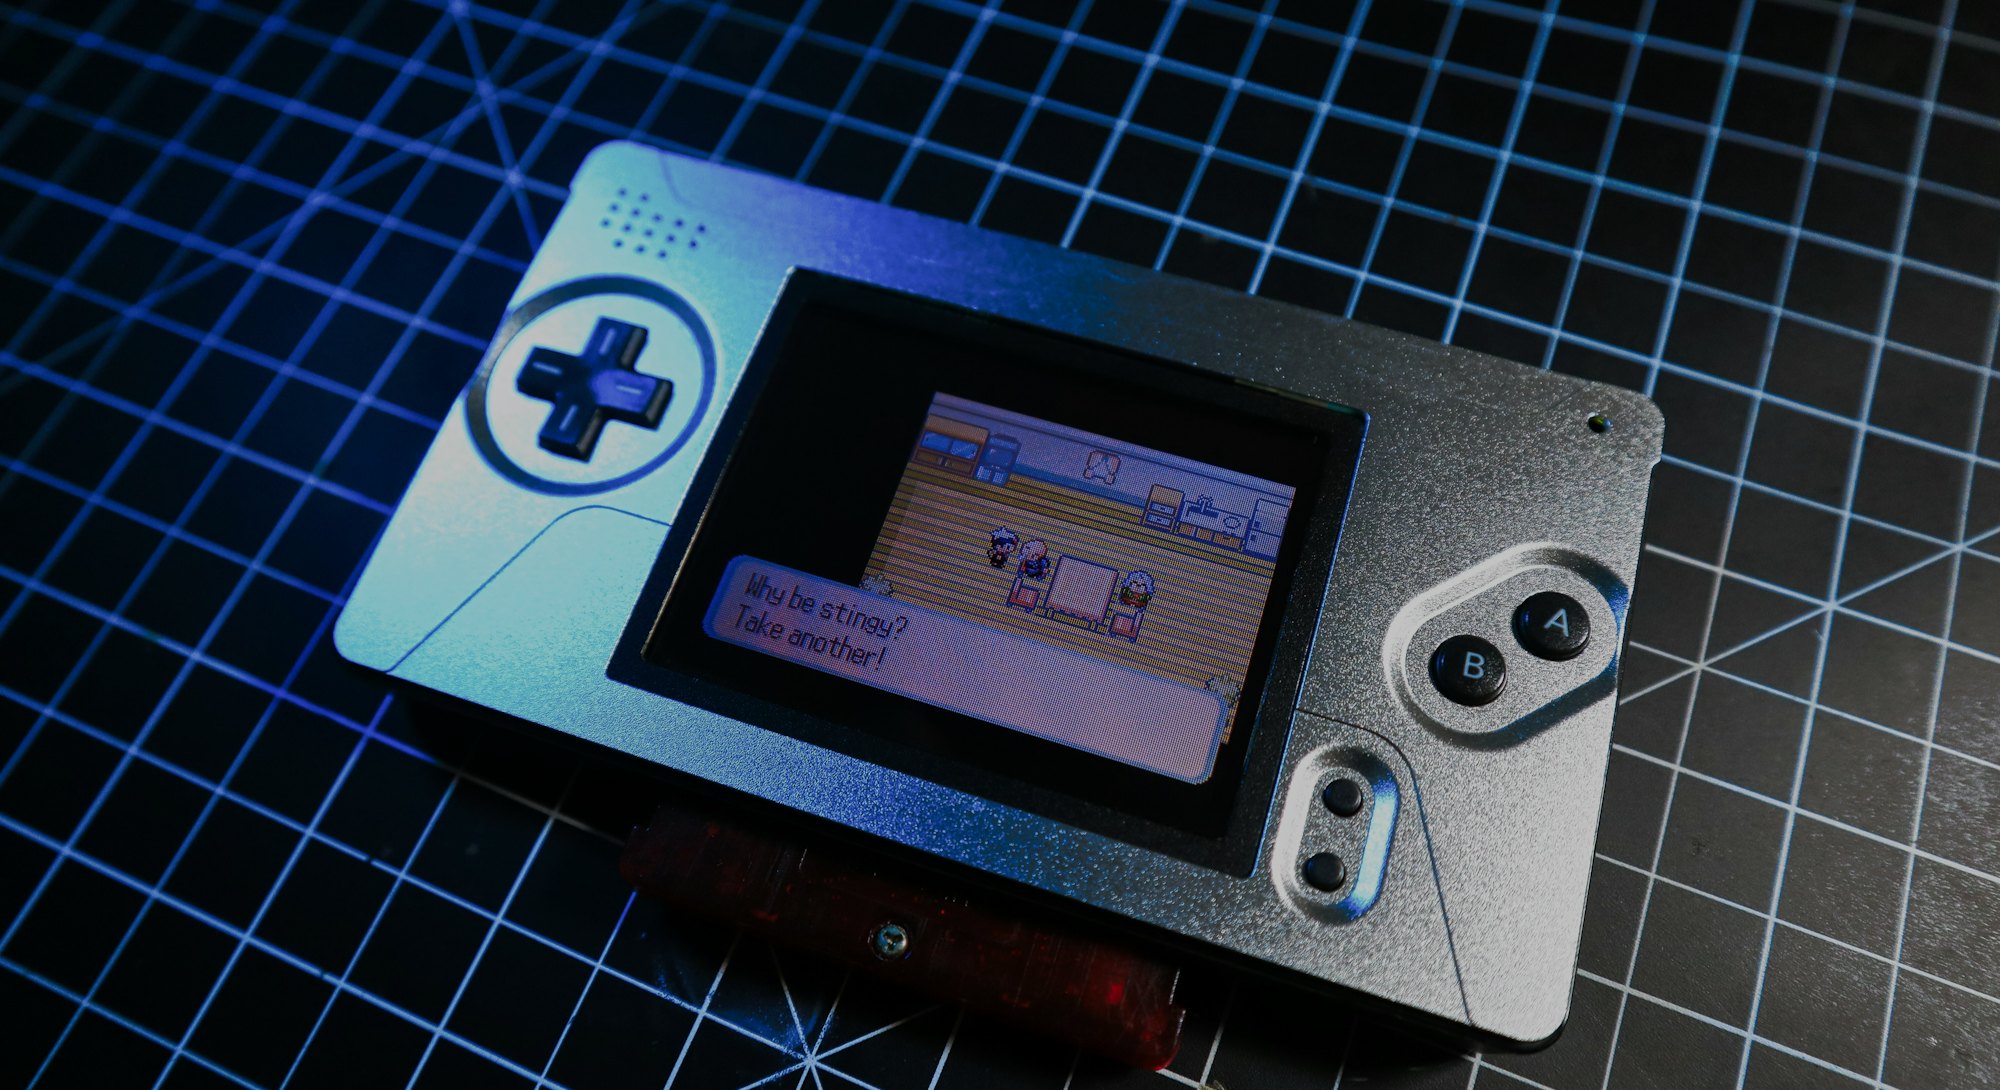 Game Boy Macro review: How I modded my DS Lite into the ultimate Game Boy Advance Nintendo never mad...